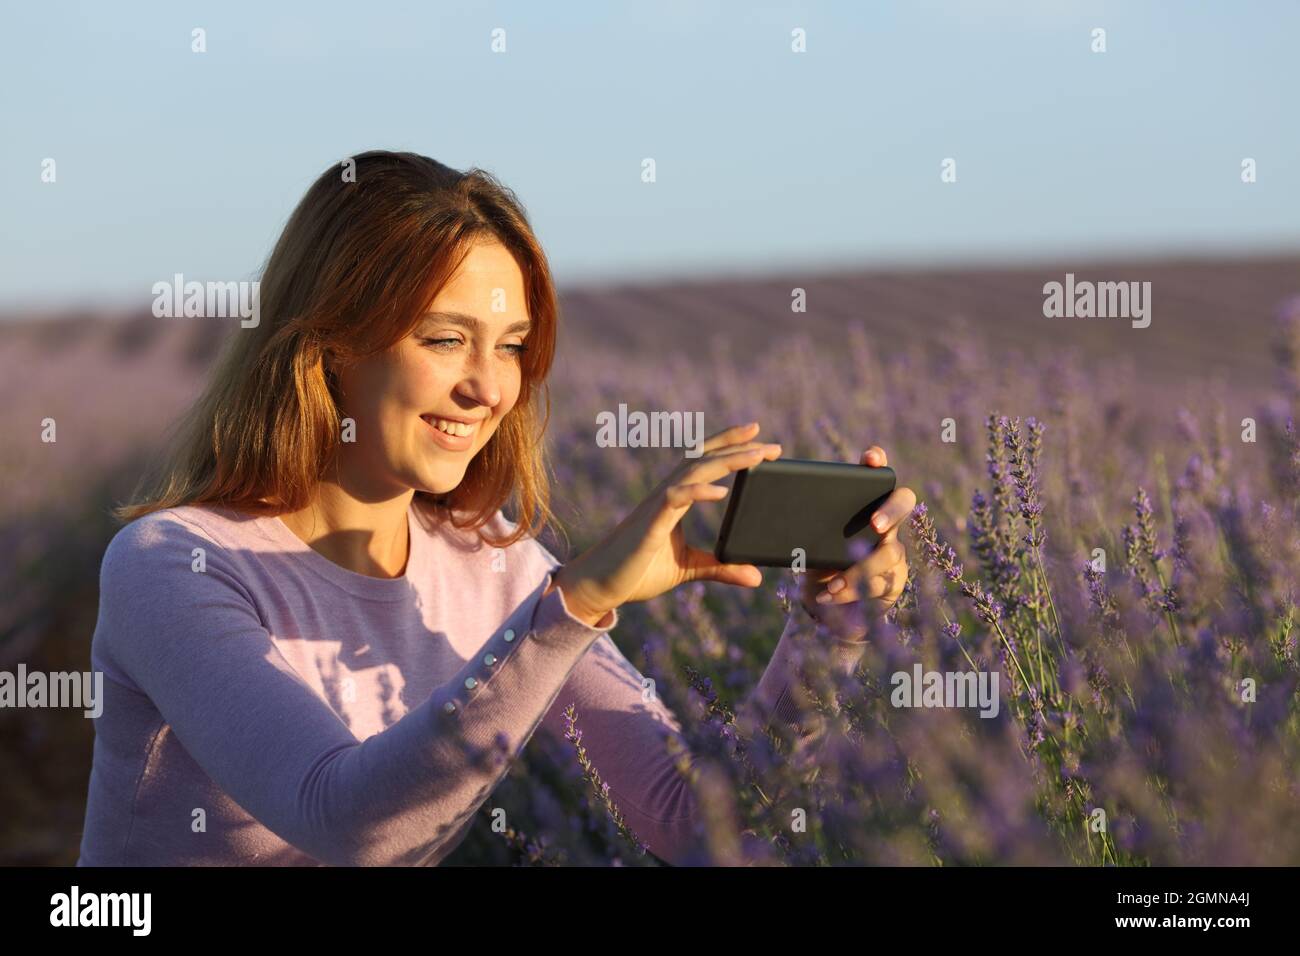 Happy woman taking photos with smartphone in lavender field at sunset Stock Photo